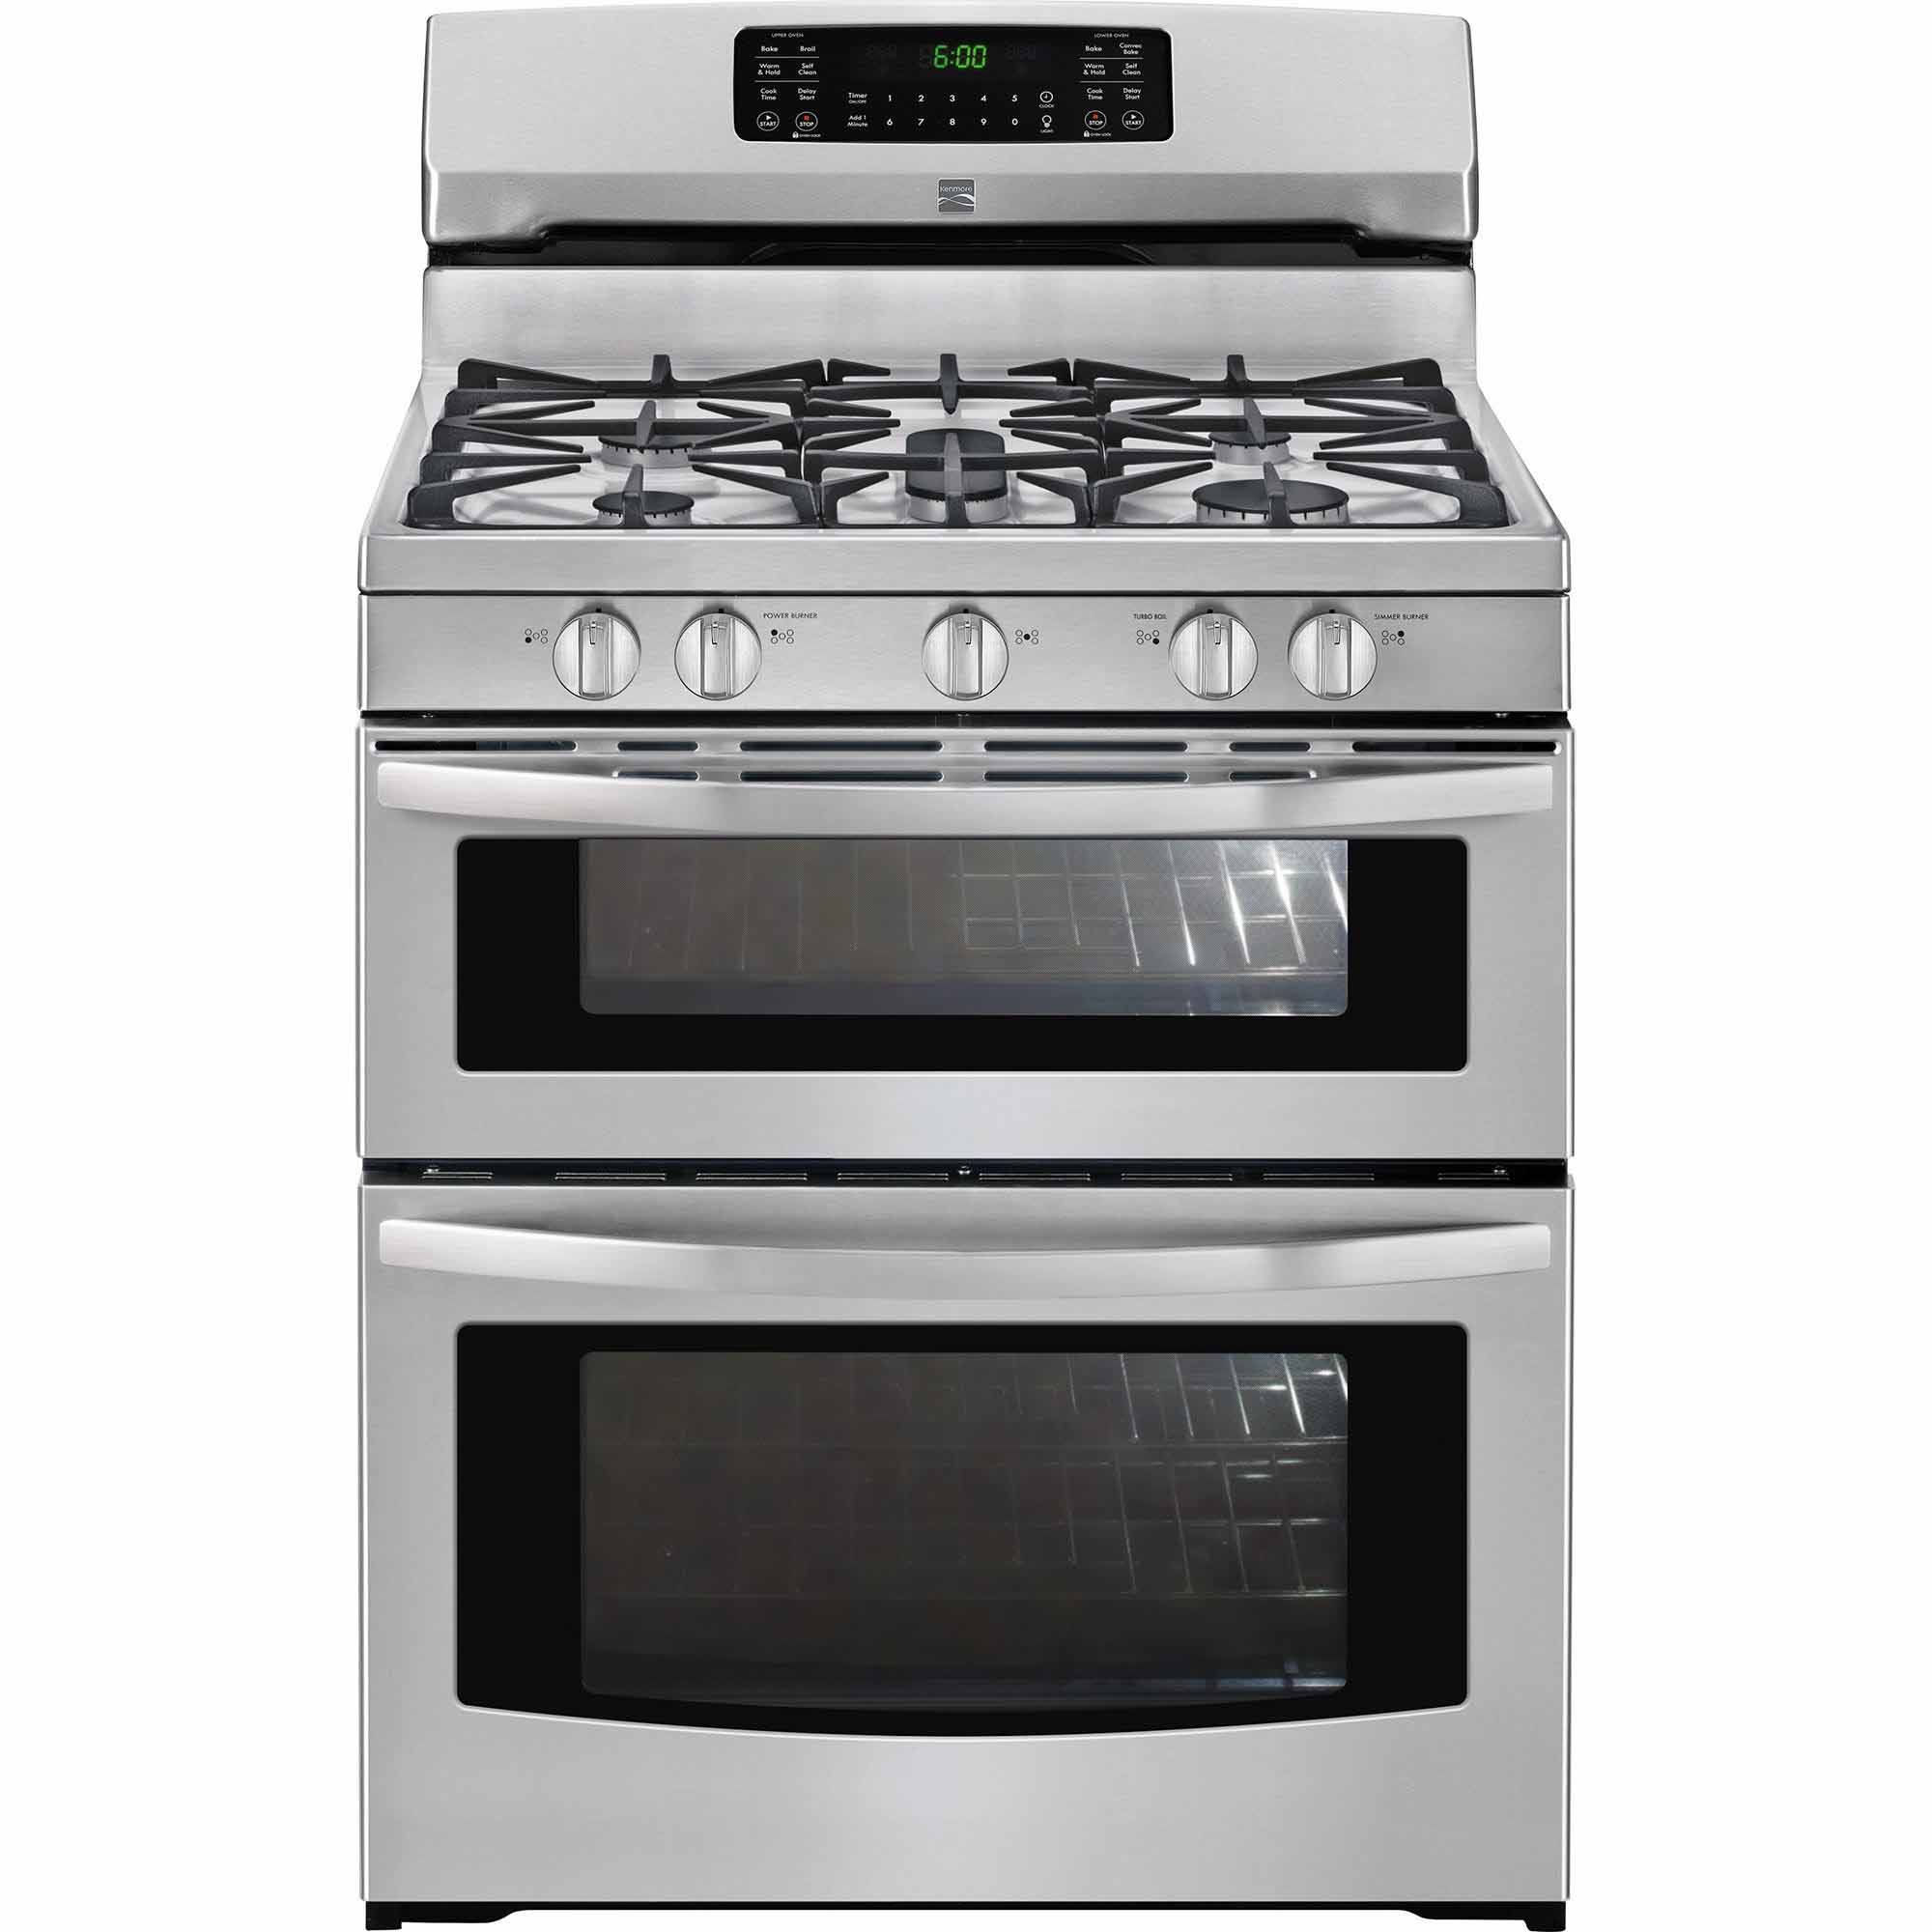 Kenmore 78143 5 9 Cu Ft Double Oven Gas Range Stainless Steel